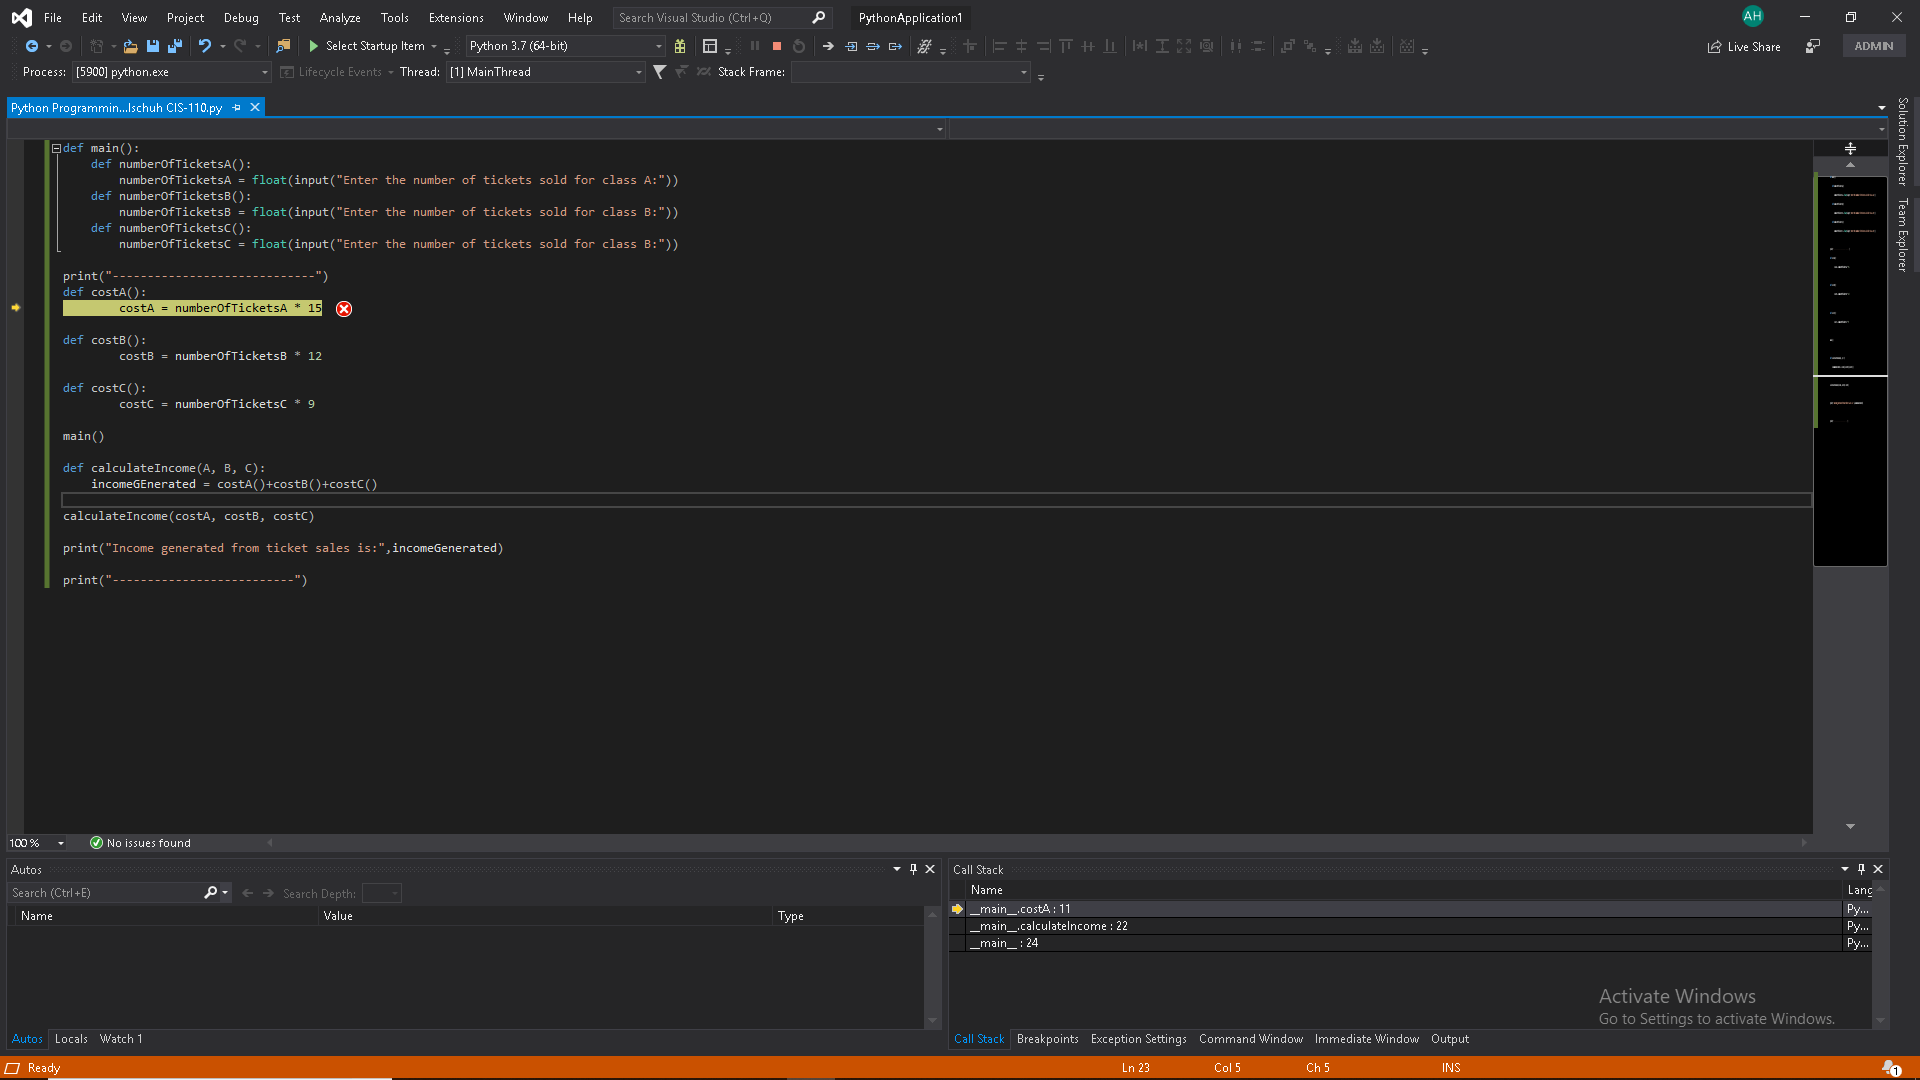 File
AH
Extensions Window
Search Visual Studio (Ctrl+Q)
PythonApplication1
Edit
View
Project
Debug
Test
Analyze
Tools
Help
Select Startup Item
Live Share
Python 3.7 (64-bit)
ADMN
Lifecycle Events Thread: [1] MainThread
Stack Frame:
Process: [5900] python.exe
Python Programmin...Ischuh CIS-110.py
X
E def main):
def numberofTicketsA():
numberOf TicketsA = float(input ( " Enter the number of tickets sold for class A:"))
def numberofTicketsB ( ) :
numberOf TicketsB = float(input ( " Enter the number of tickets sold for class B:"))
def numberOfTicketsC ( ):
numberOfTicketsc = float(input (" Enter the number of tickets sold for class B:")).
print("-
def costA)
costA numberOfTicketsA 15
X
def costB()
costB= numberOfTicketsB 12
def costC()
costC numberOfTicketsć * 9
main)
def calculate Income (A, B, C):
incomeGEnerated = costA()+costB( ) +costC ()
calculateIncome ( costA, costB, costC)
print("Income generated from ticket sales is:",incomeGenerated)
print("
100 %
No issues found
nx Call Stack
Autos
Name
Lang
Search Depth:
Search (Ctrl+E)
main_.costA: 11
main_.calculatelncome: 2
|main_: 24
Py...
Py..
Py..
Name
Value
Type
Activate Windows
Go to Settings to activate Windows.
Autos Locals Watch 1
Call Stack Breakpoints Exception Settings Command Window Immediate Window Output
Ready
Ln 23
Col 5
Ch 5
INS
Solution Explorer Team Explorer
